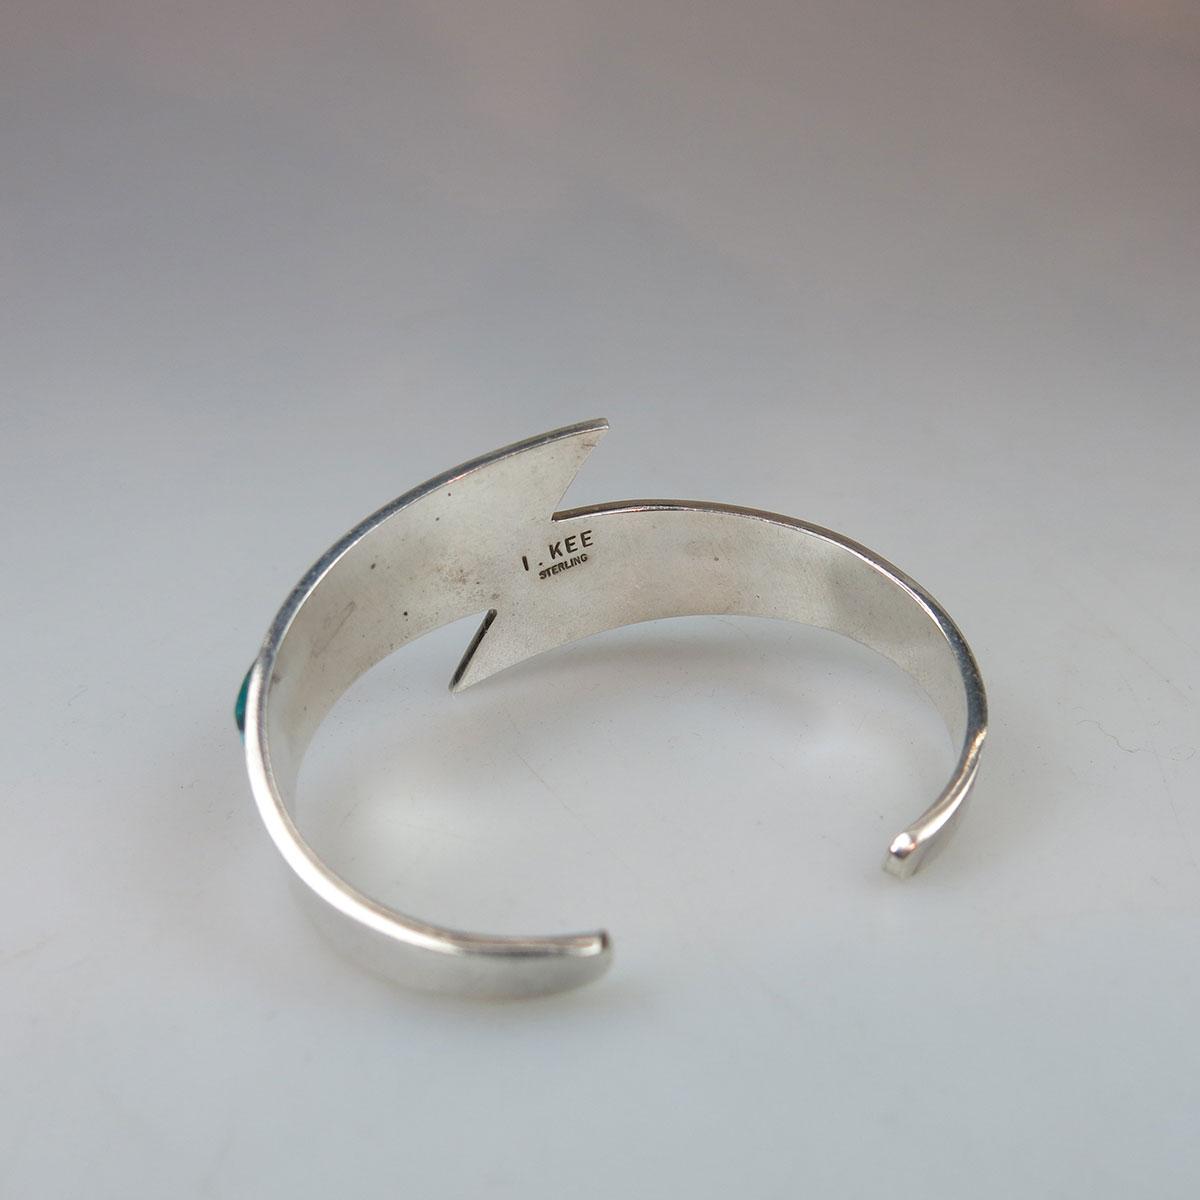 I. Kee Navajo sterling silver open bangle 